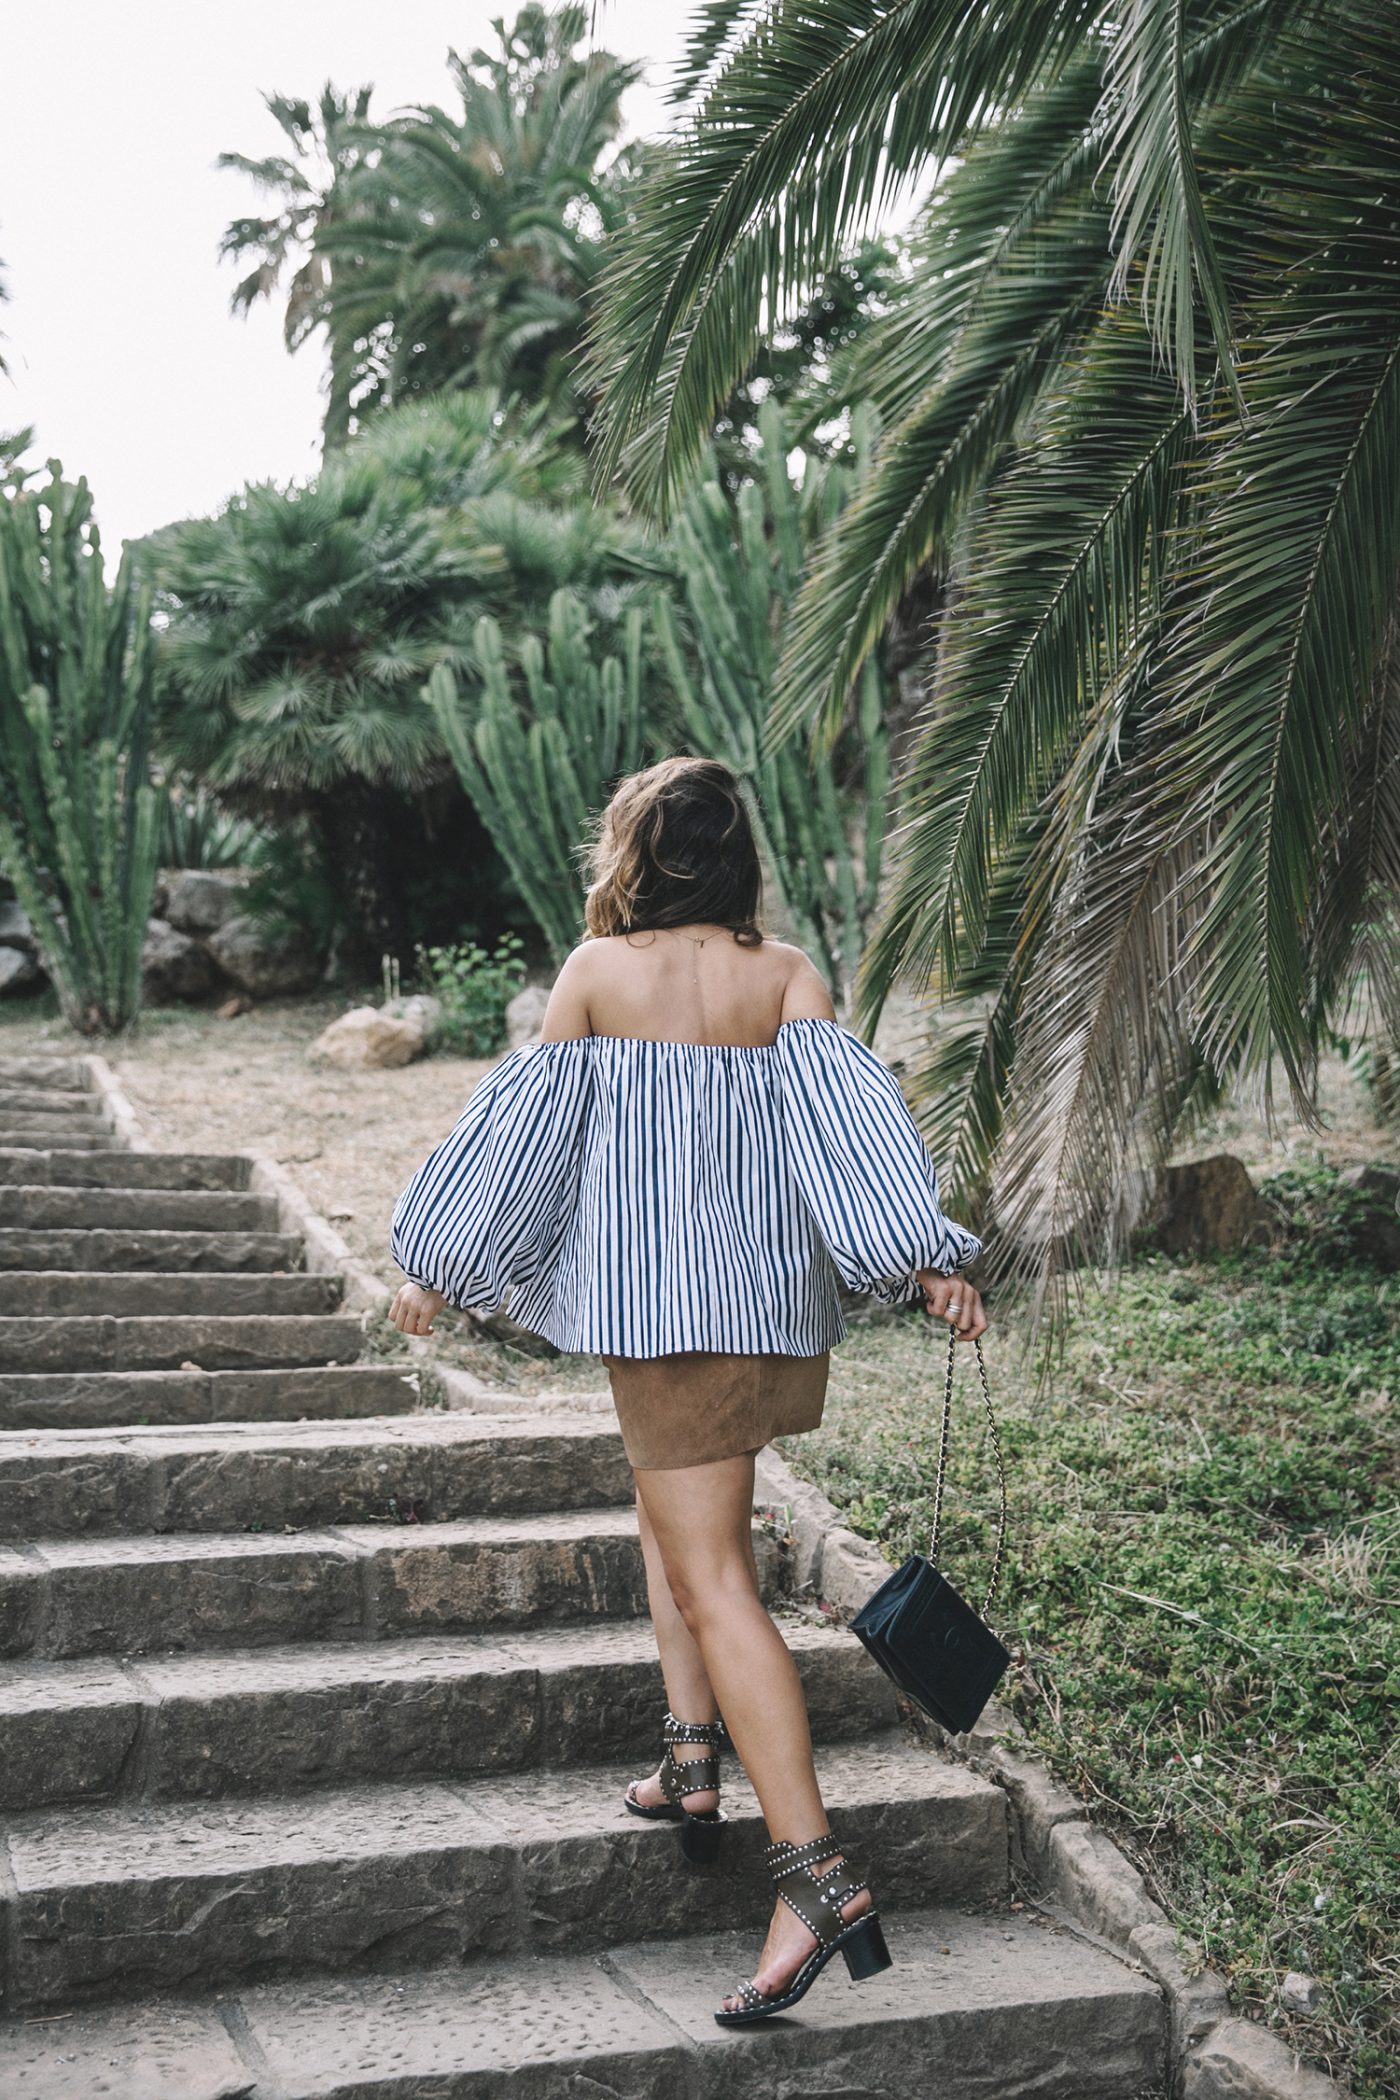 Chicwish-Off_The_Shoulders_Top-Outfit-Suede_Skirt-Free_People-Isabel_marant_Sandals-Chanel_Vintage_Bag-Statement_Earrings-Boho-Collage_Vintage-26